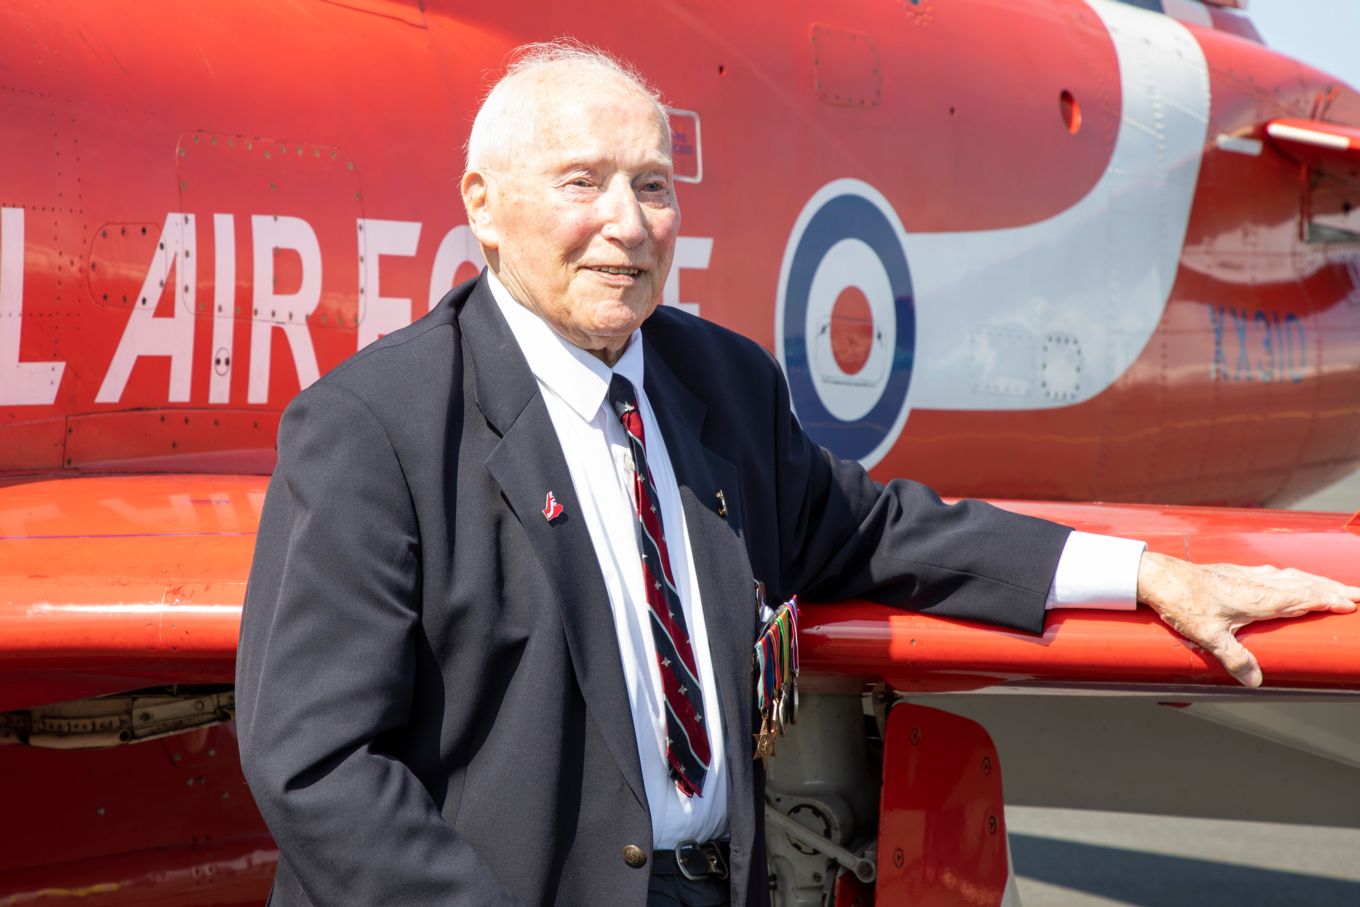 Image shows a veteran in front of a Red Arrow aircraft.